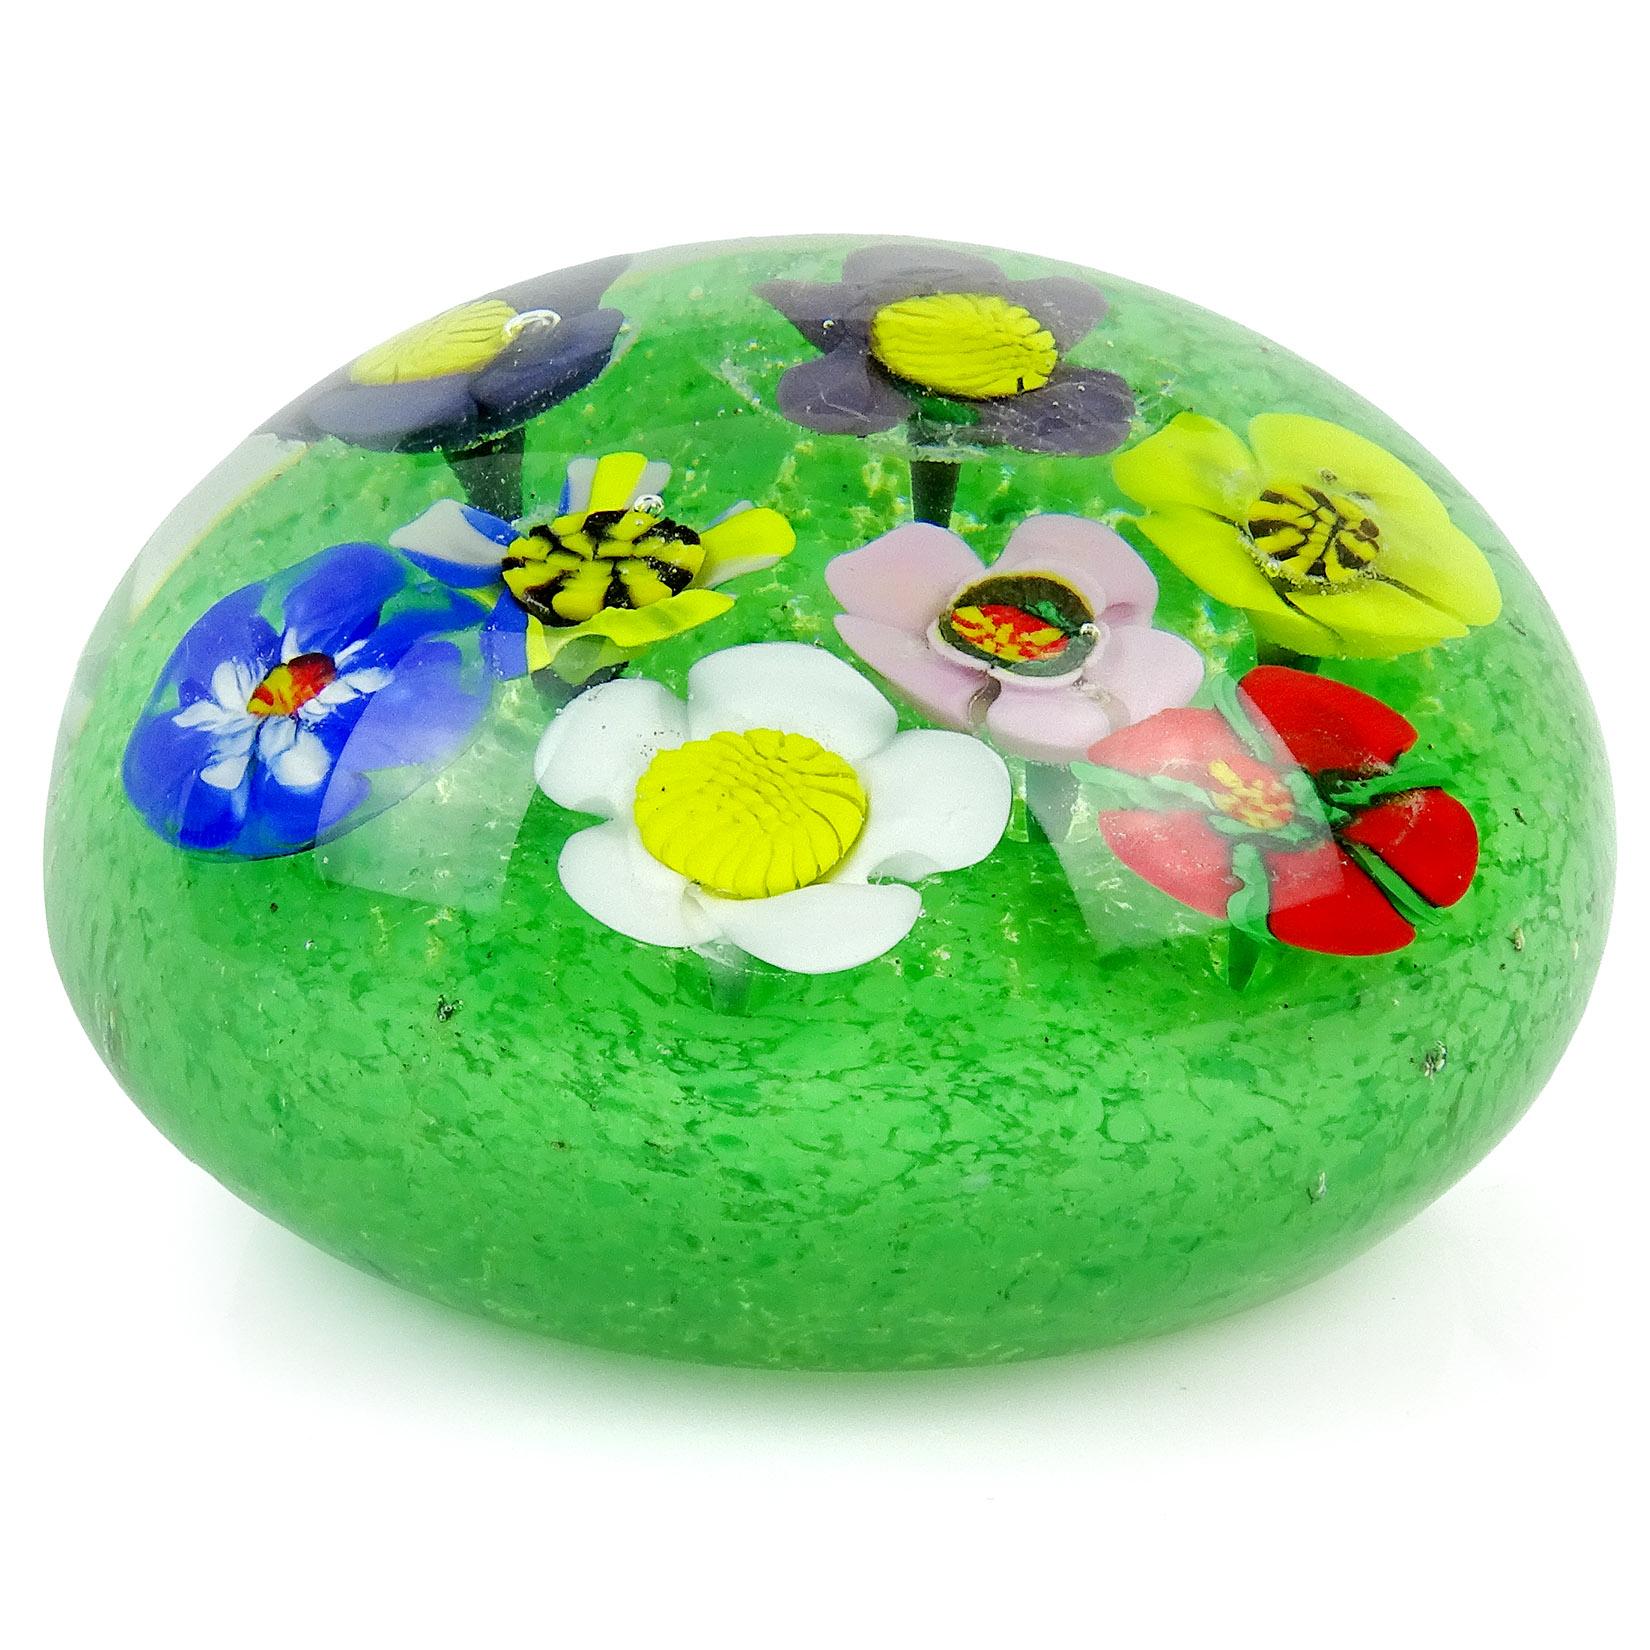 Gorgeous large vintage Murano hand blown millefiori wild flower garden Italian art glass paperweight. Each flower has a different color and pattern, and grow out of a green grass bed, made with little dots of color. Measures: 3 3/4